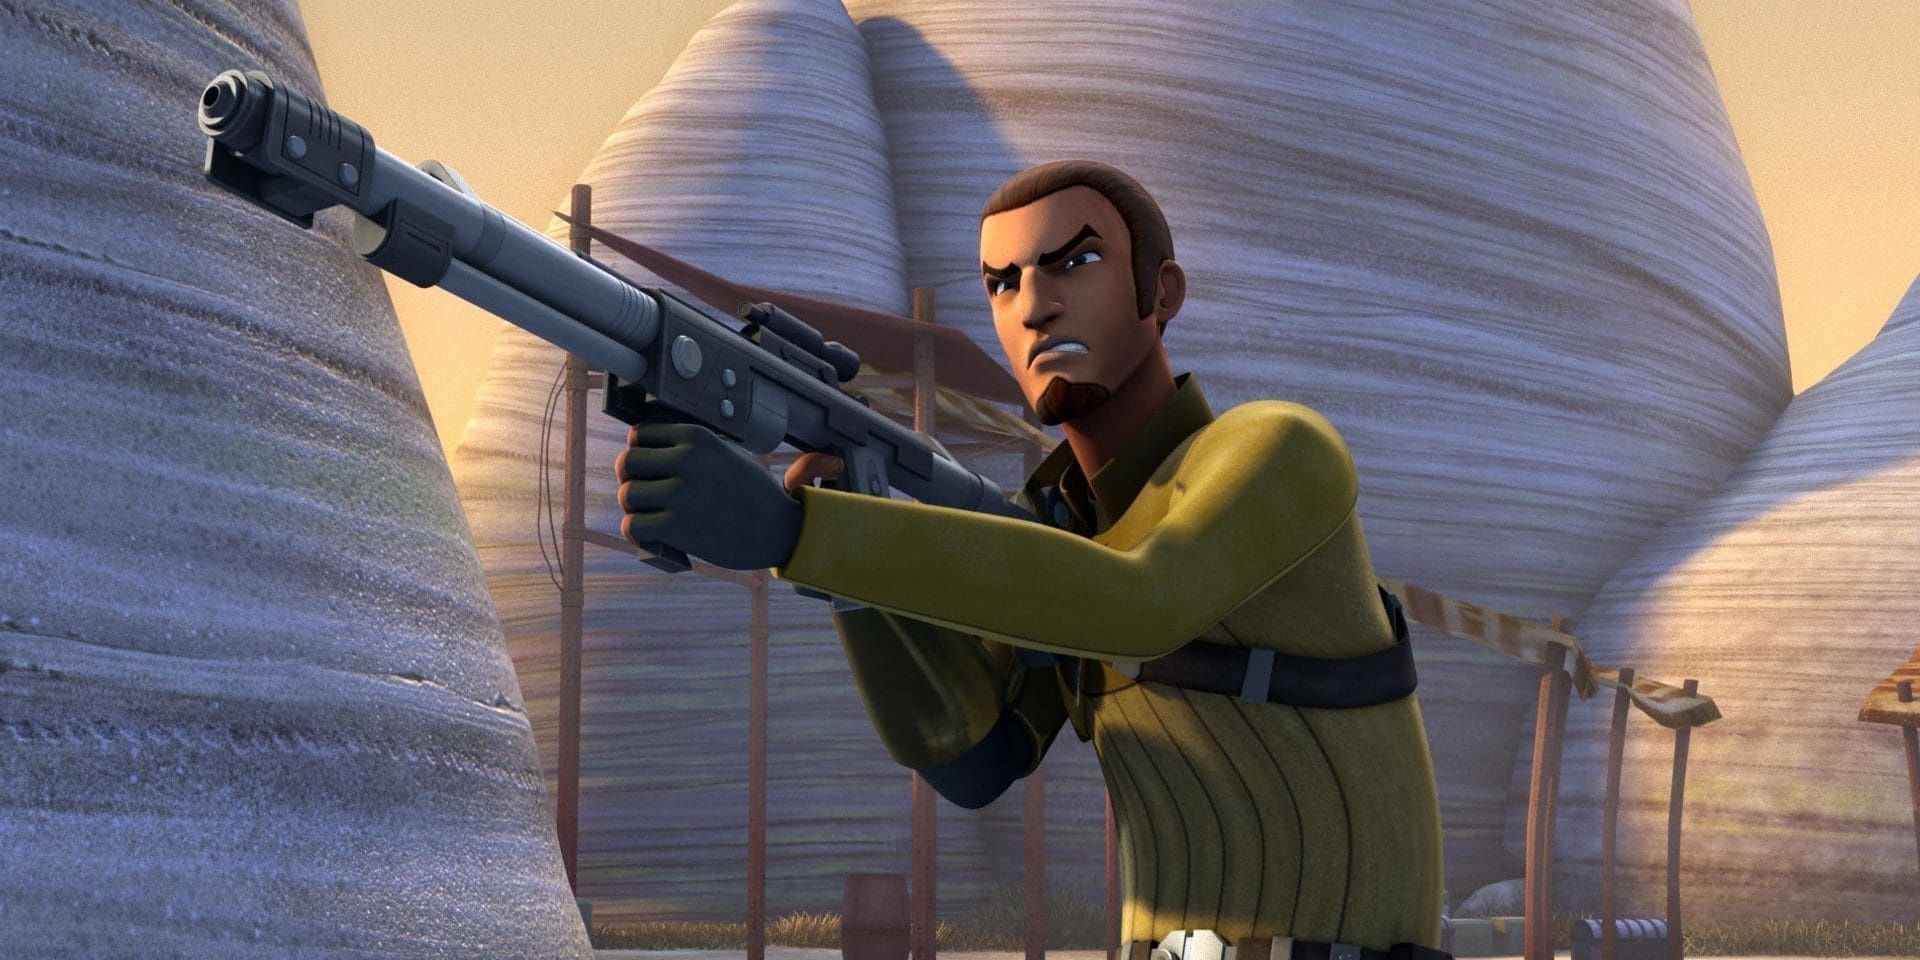 An image of a disruptor rifles from the Star Wars video games